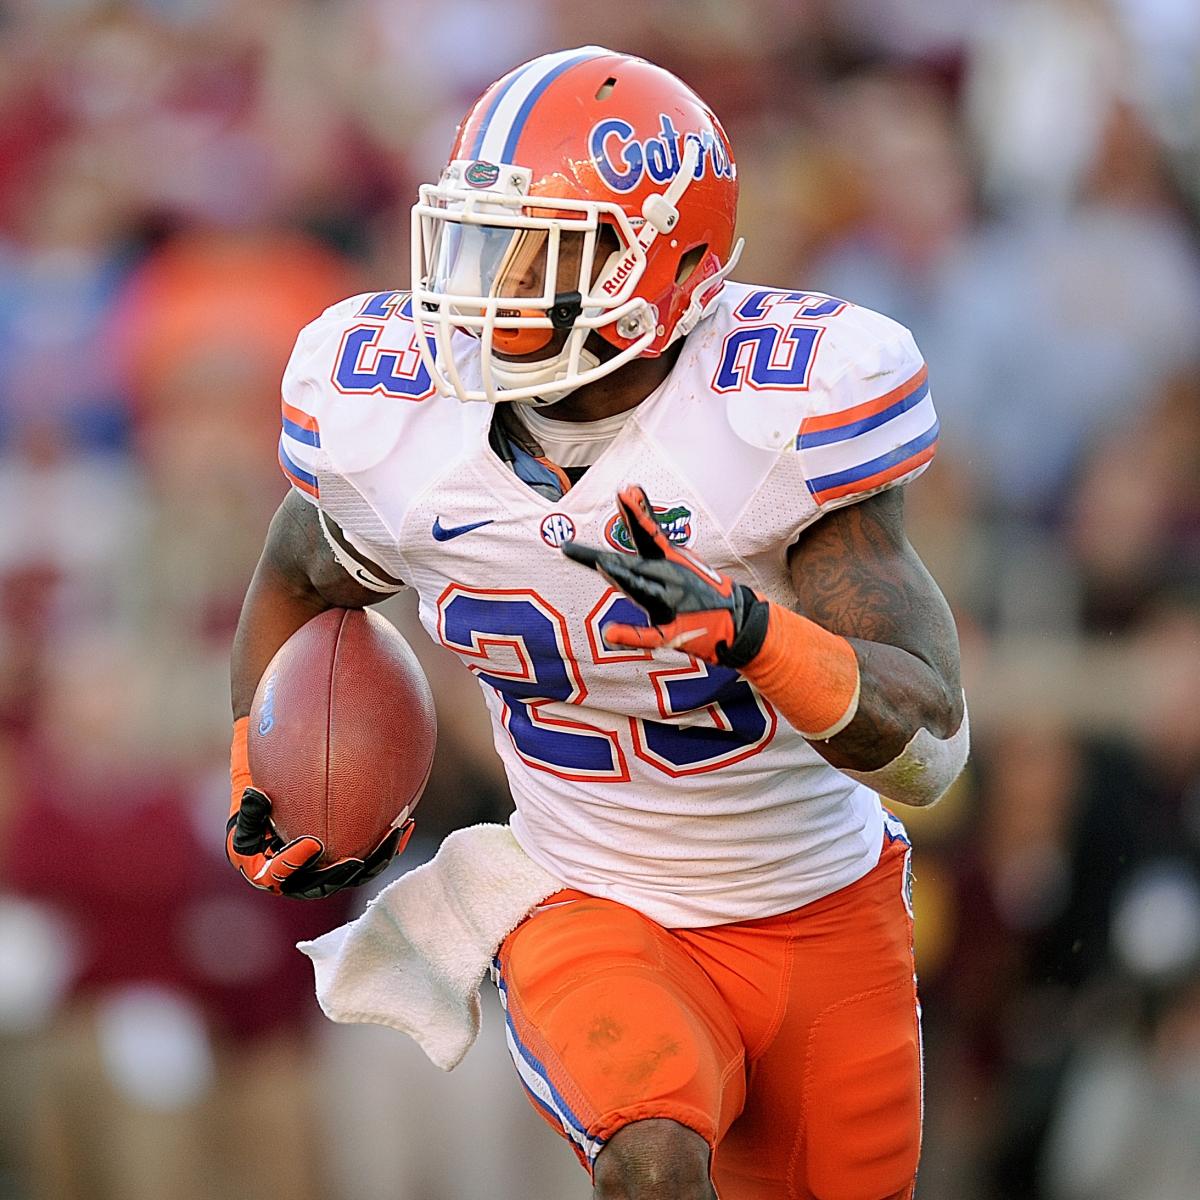 Florida vs. Florida State: Gators Find Their Offense, but Is It BCS